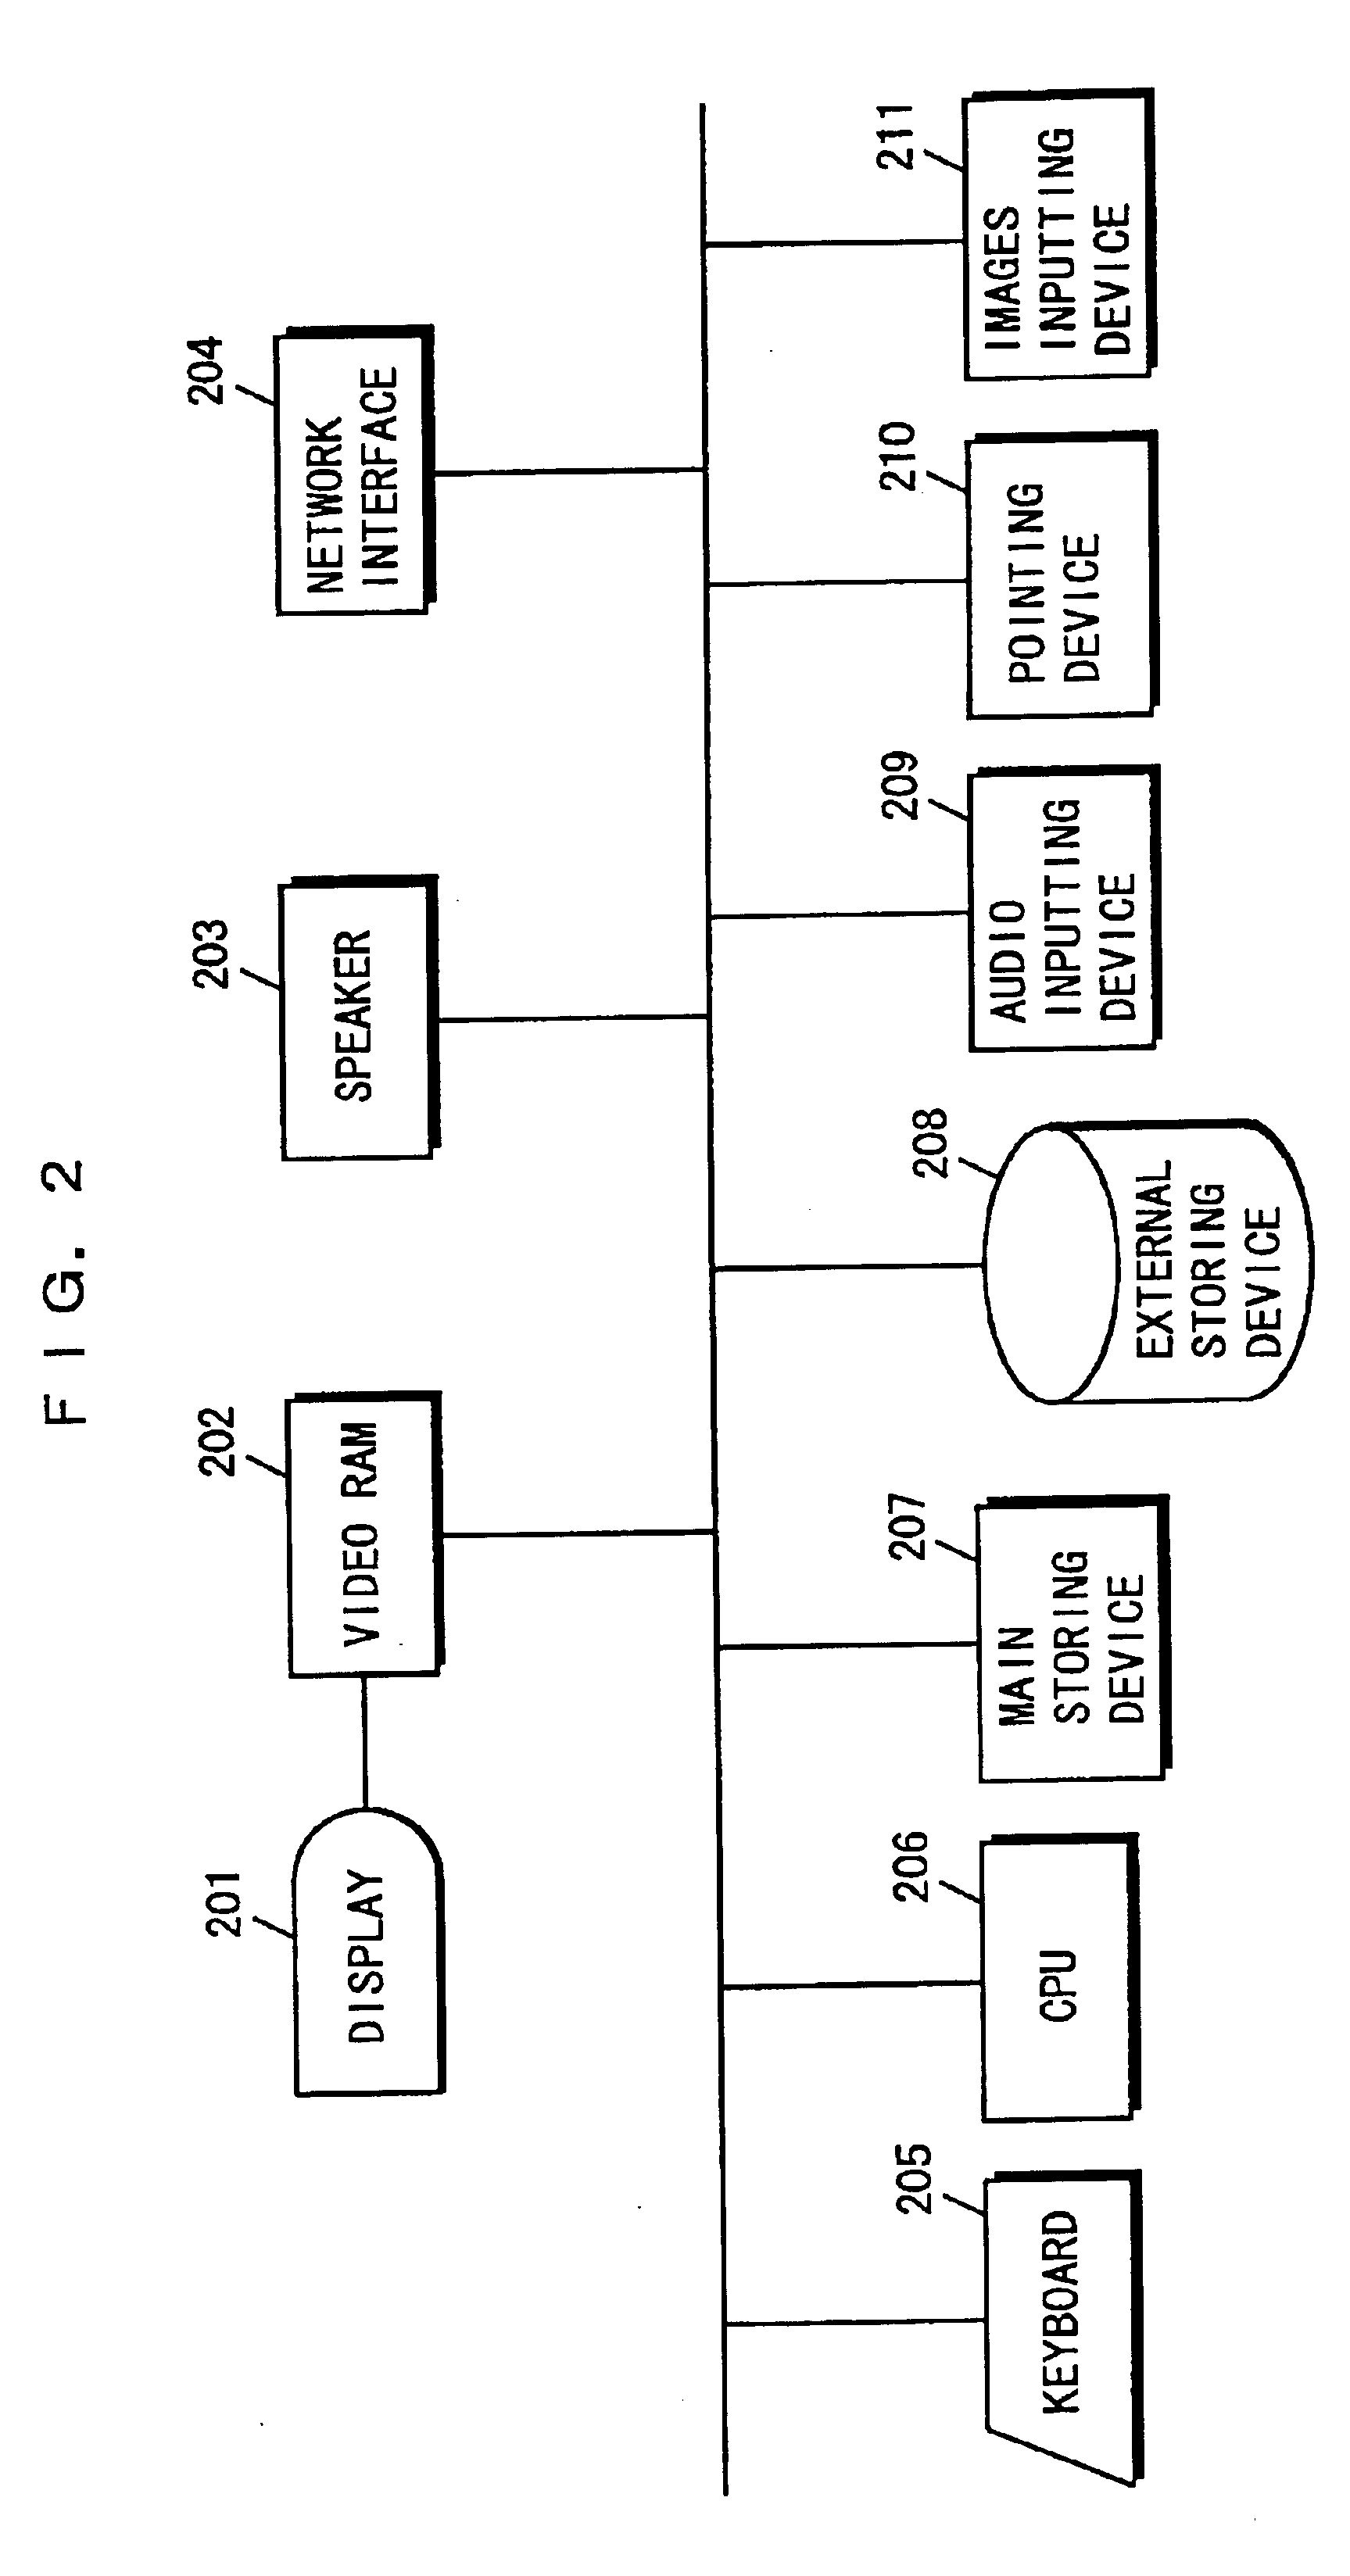 Multi-media E-mail system and device for transmitting a composed return E-mail